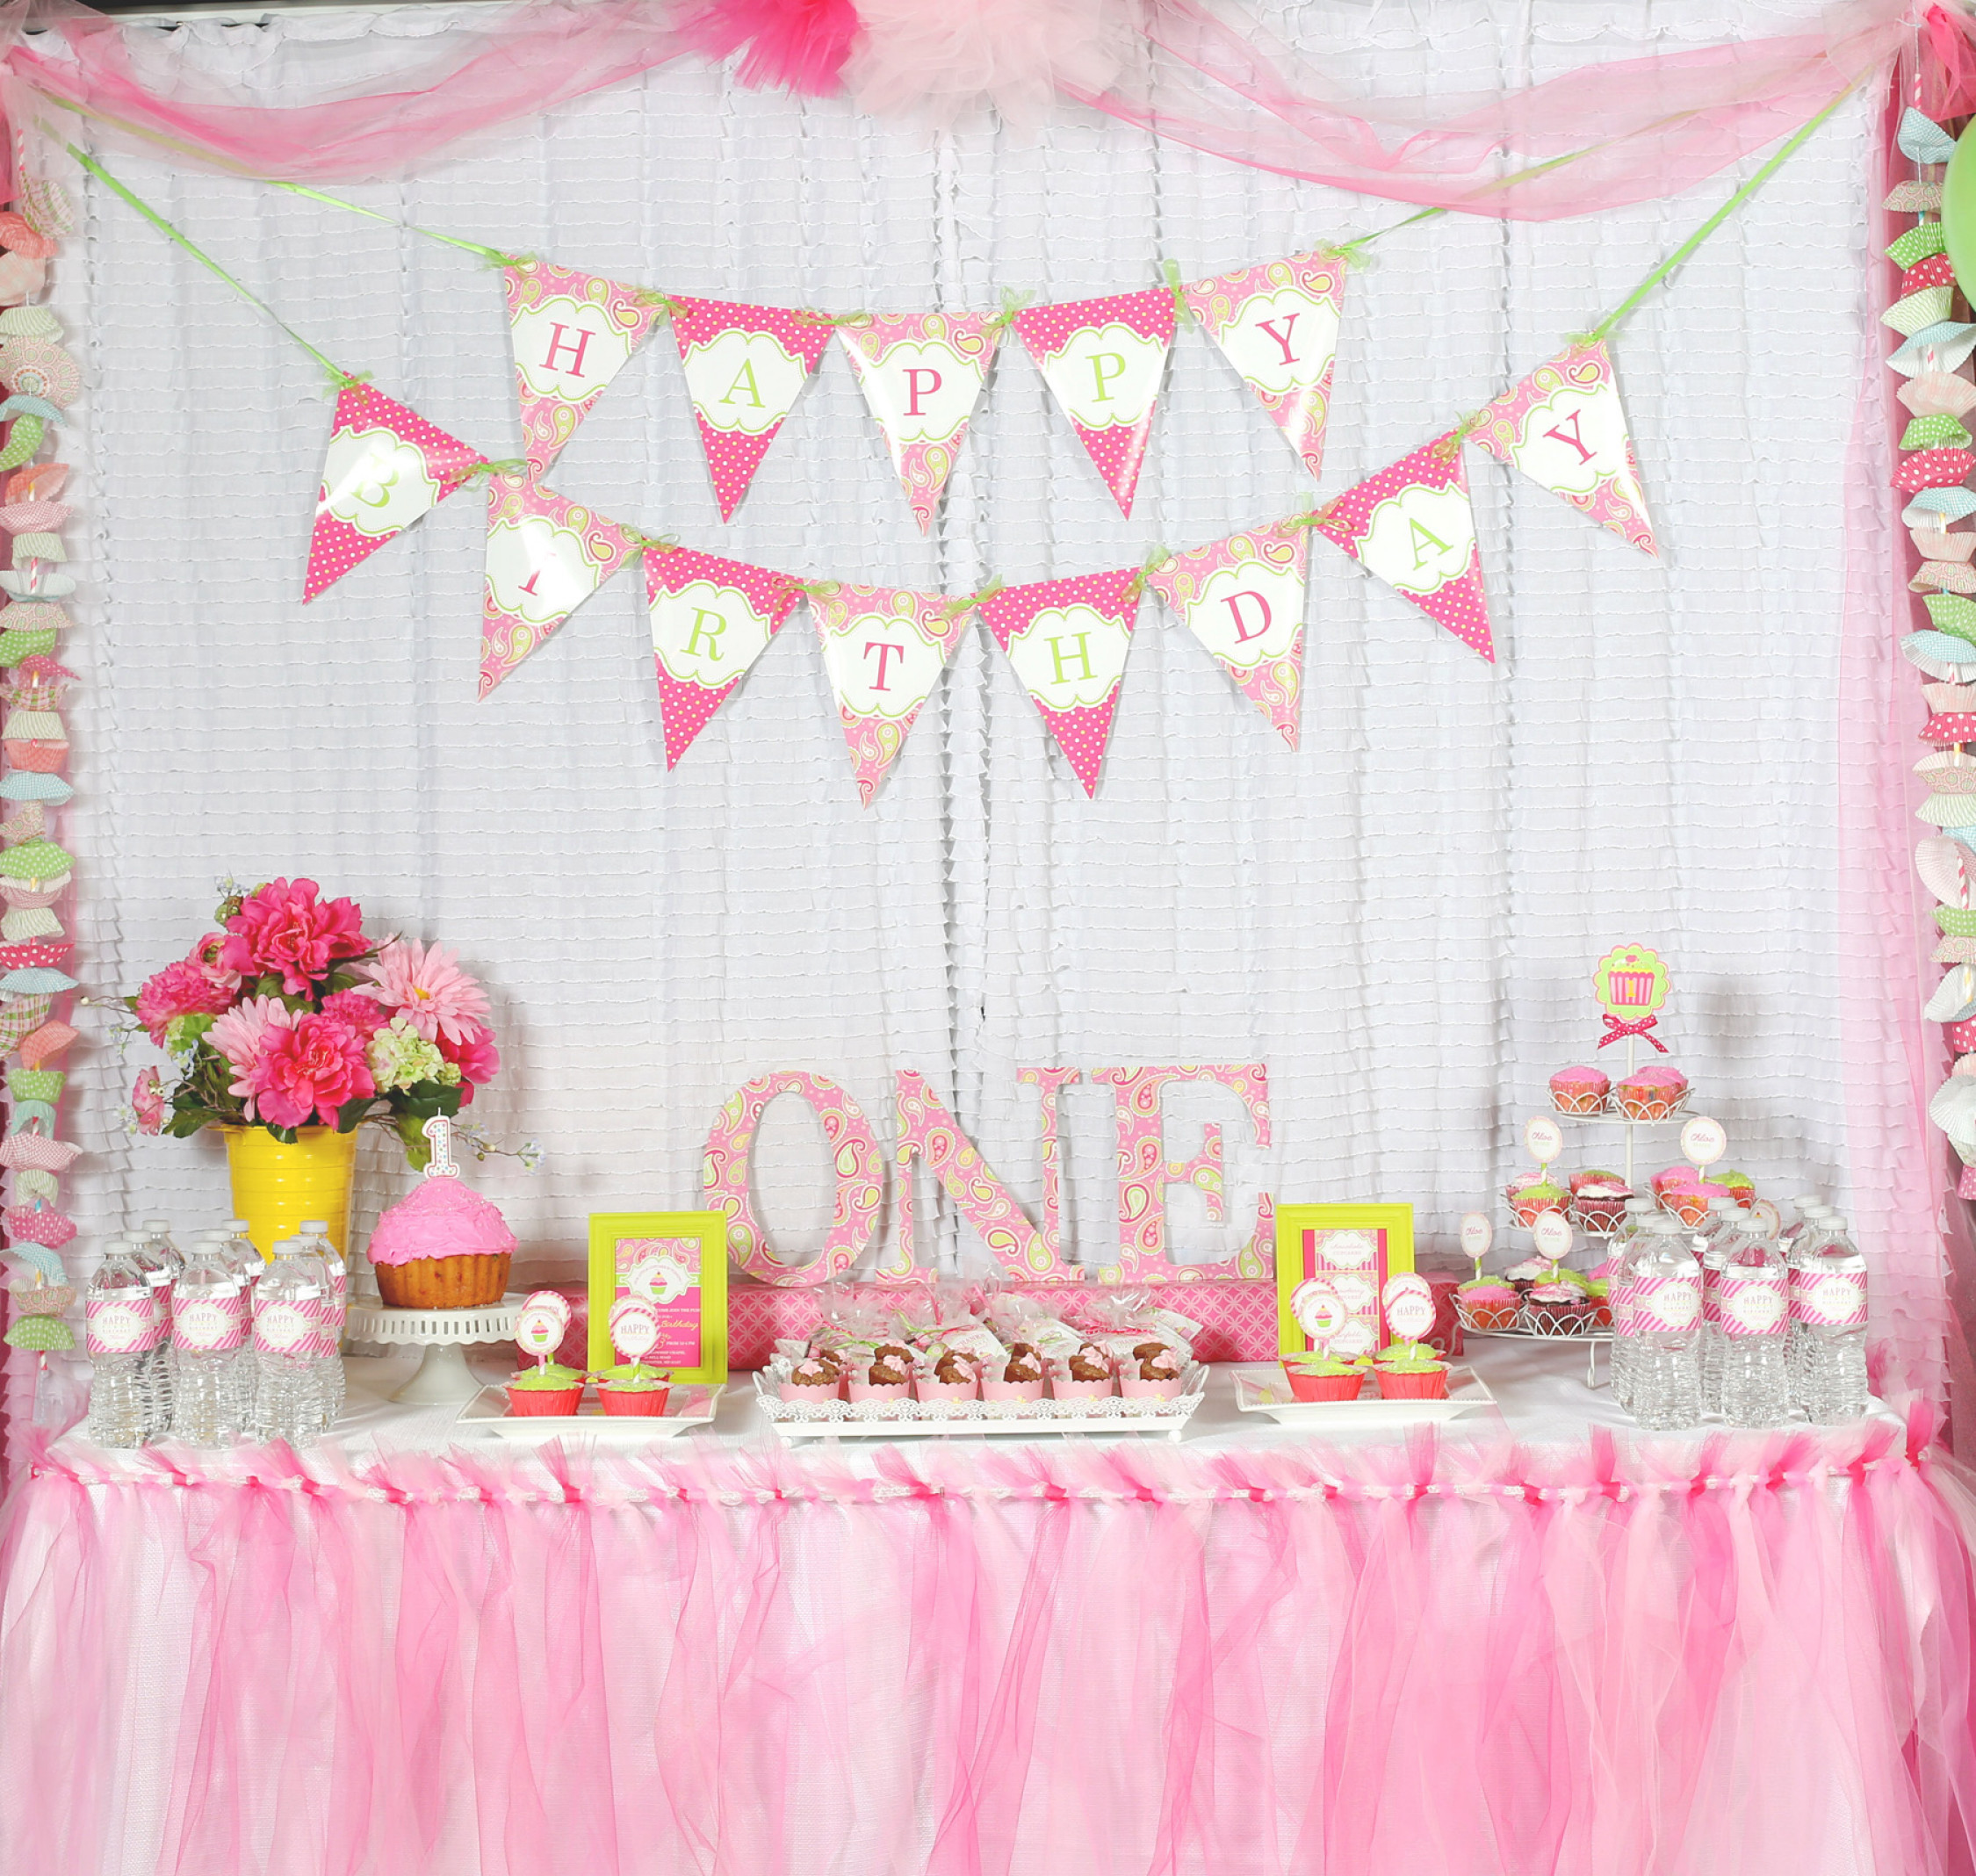 First Birthday Party Themes For Baby Girl
 A Cupcake Themed 1st Birthday party with Paisley and Polka